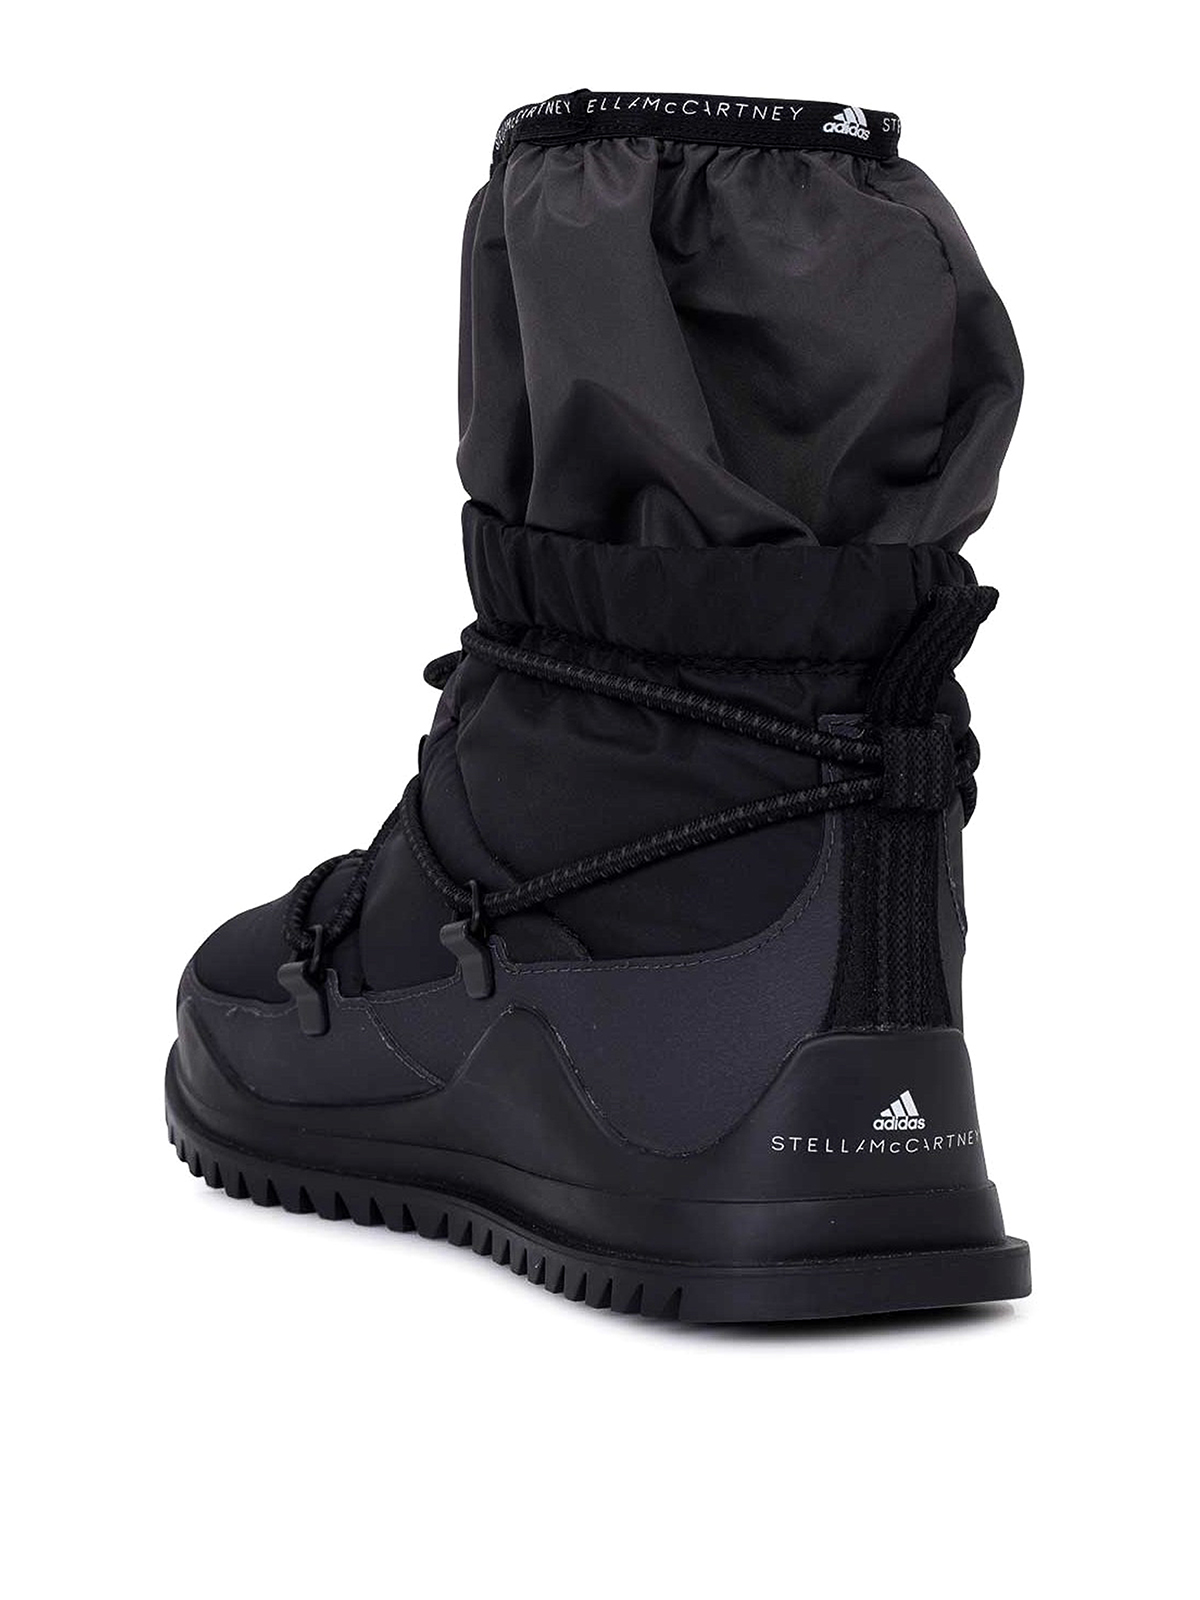 Boots Adidas by McCartney - boots - | iKRIX.com